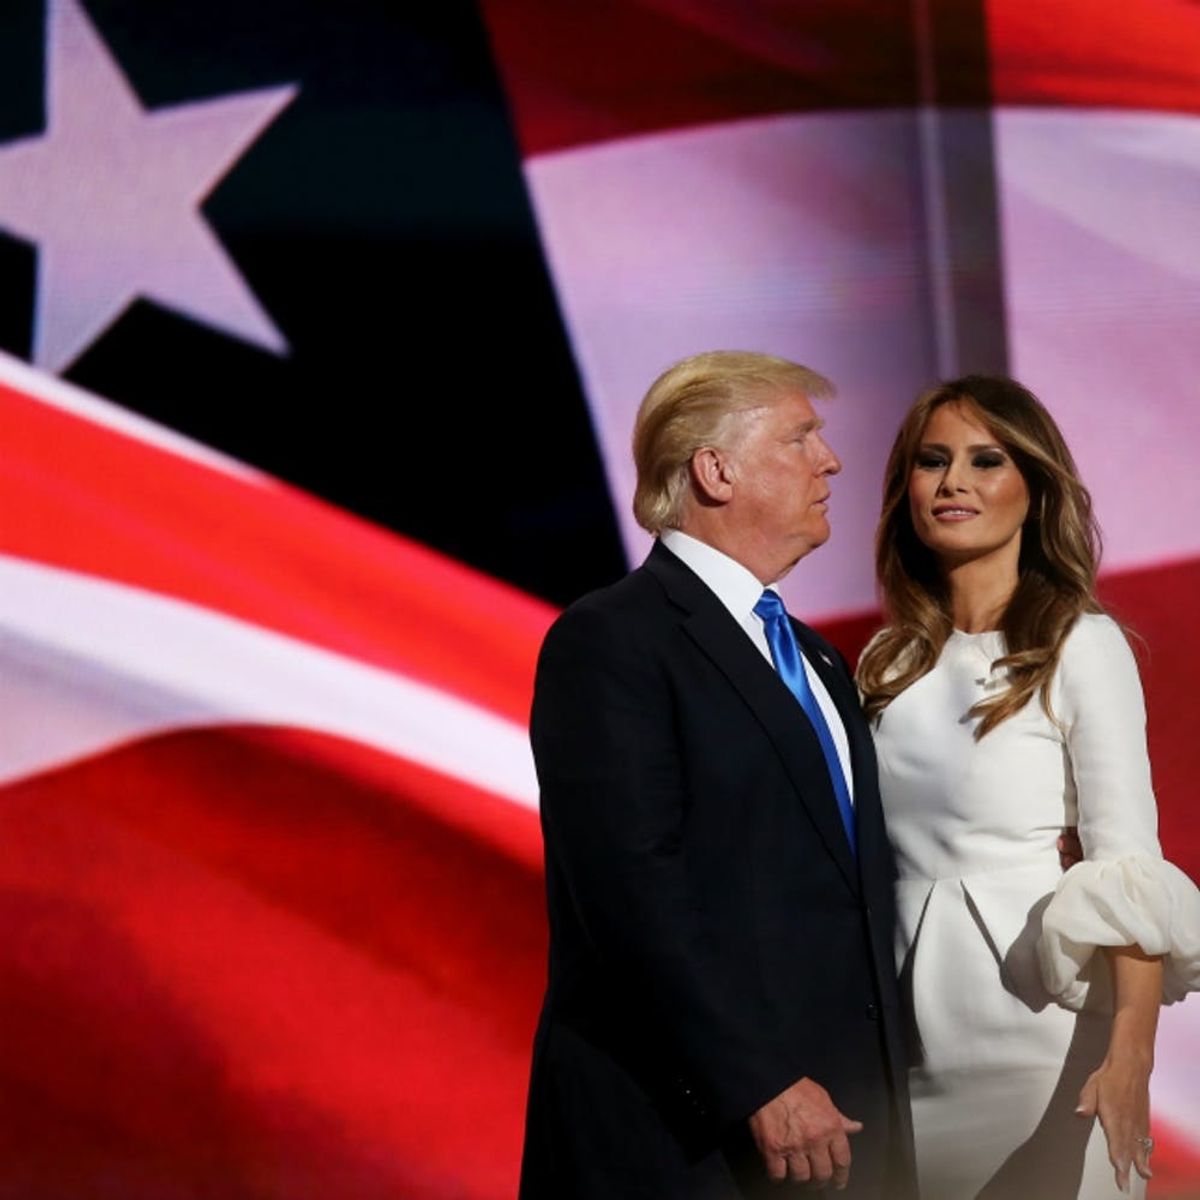 Under President Trump’s New Immigration Rules, Melania Trump Would Have Been Deported